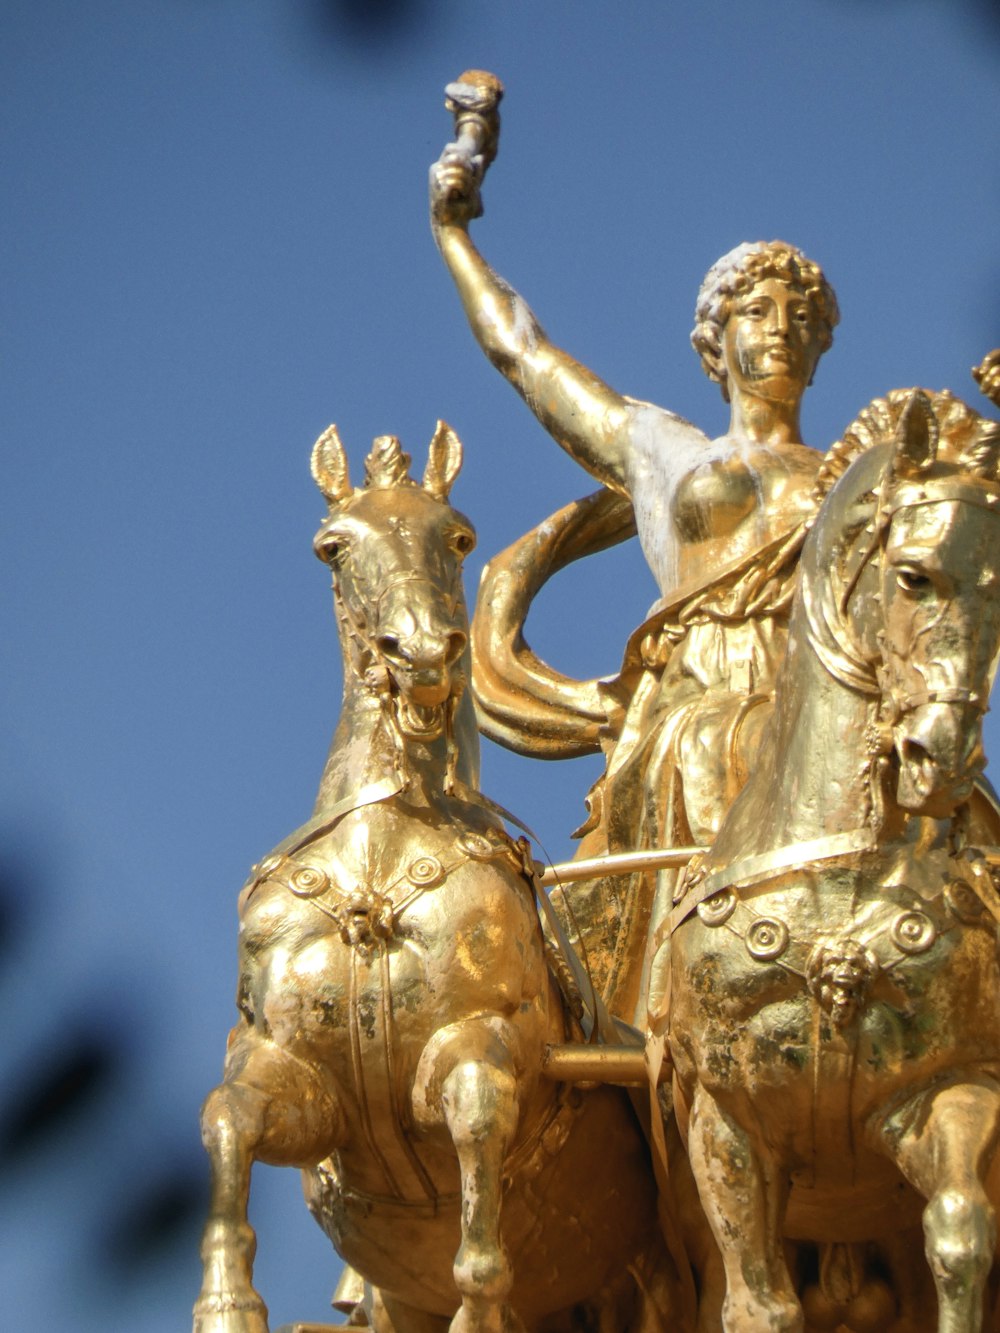 gold-colored statue of woman riding on carriage